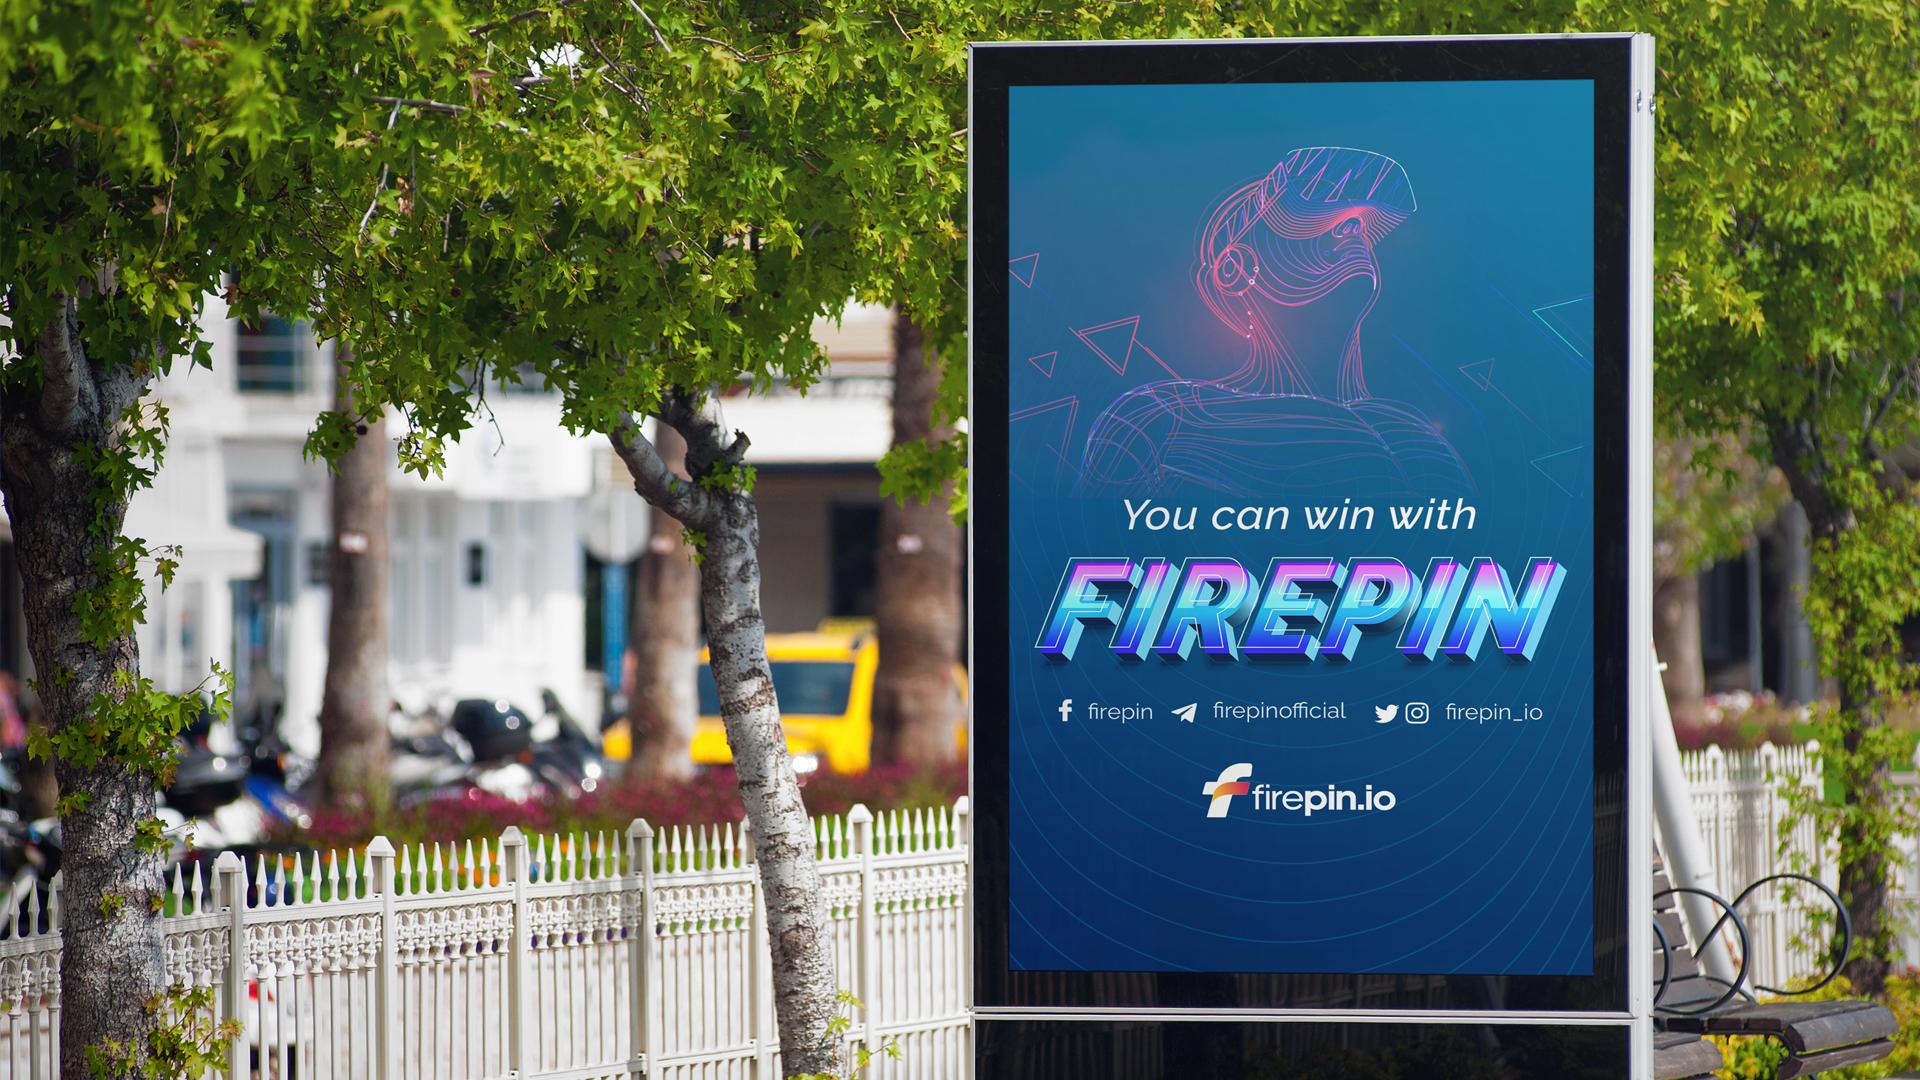 The stage is set for FIREPIN Token’s (FRPN) third presale phase as Cardano (ADA) and XRP (XRP) continue to dip